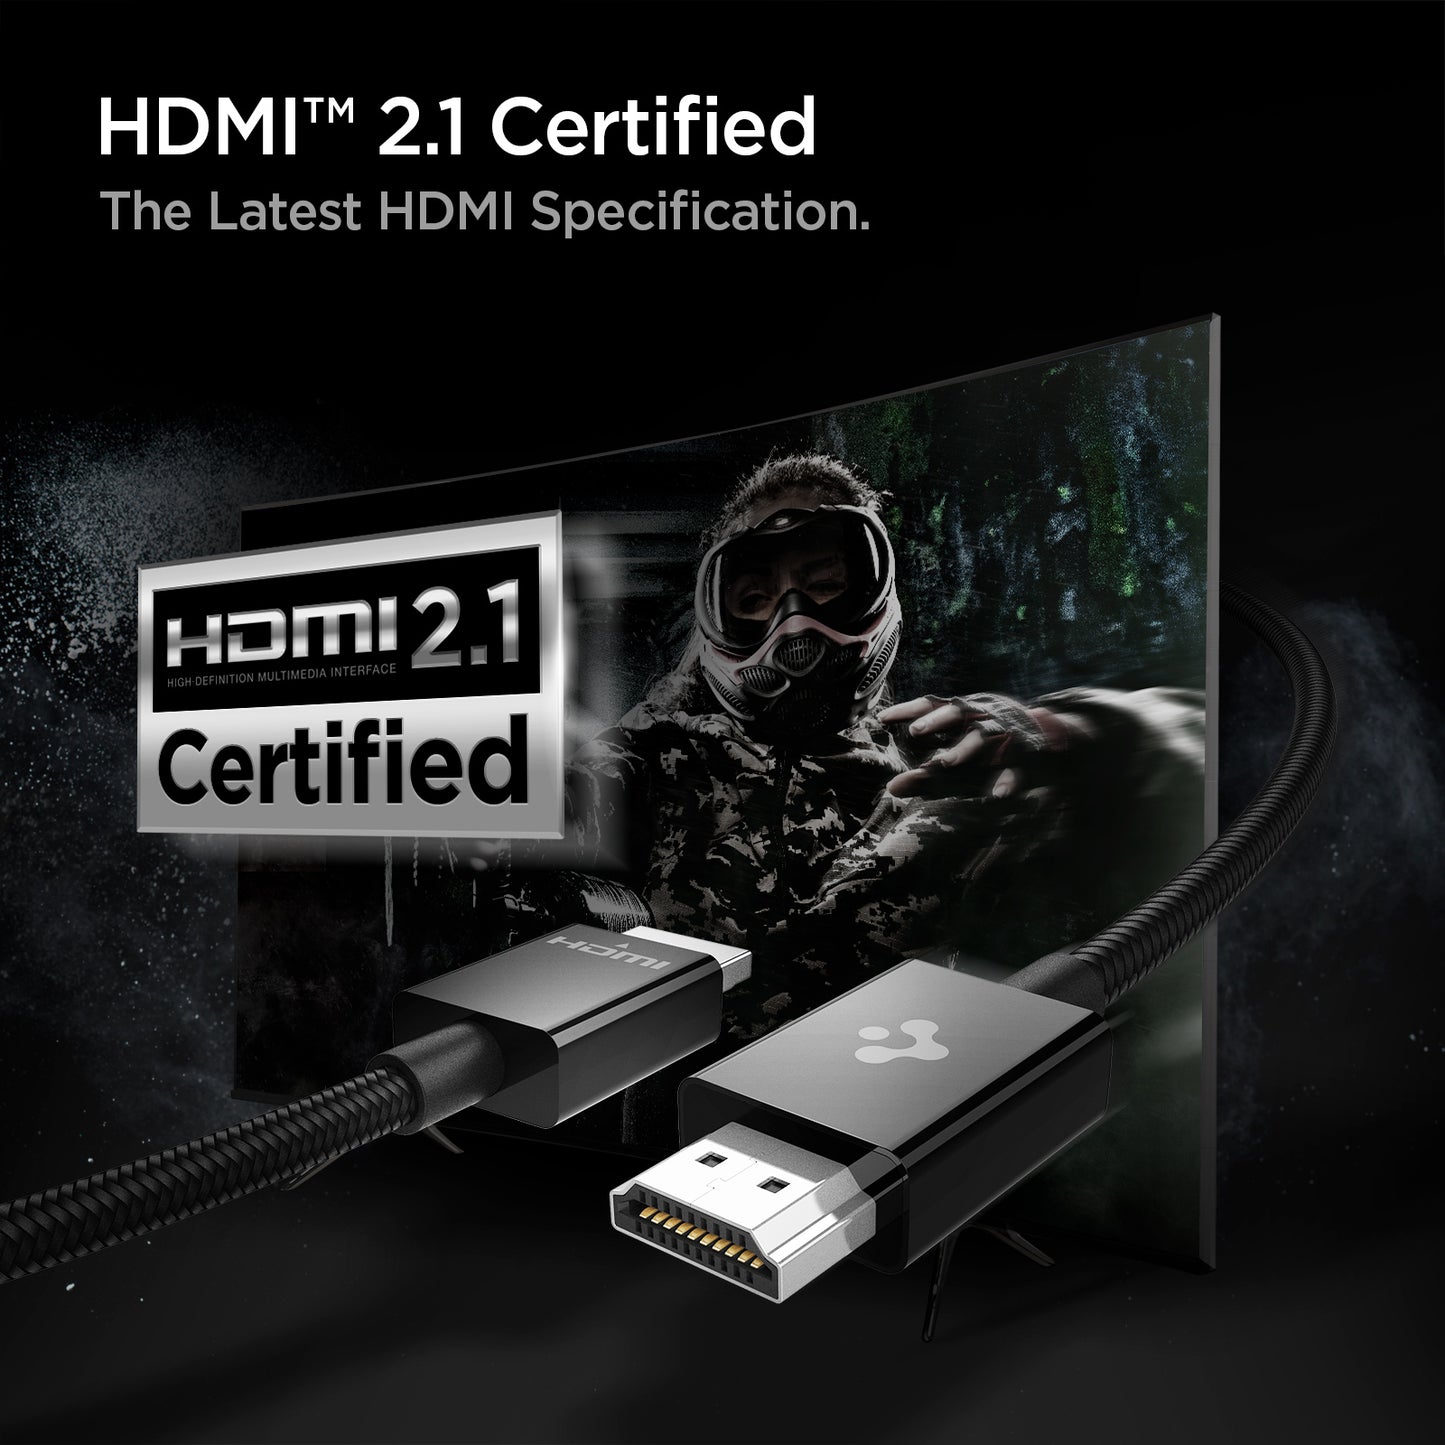 ACA02336 - ArcWire™ HDMI 2.1 Cable PB2001 in Black showing the HDMI 2.1 Certified. The Lates HDMI Specification. HDMI cable surrounds a monitor